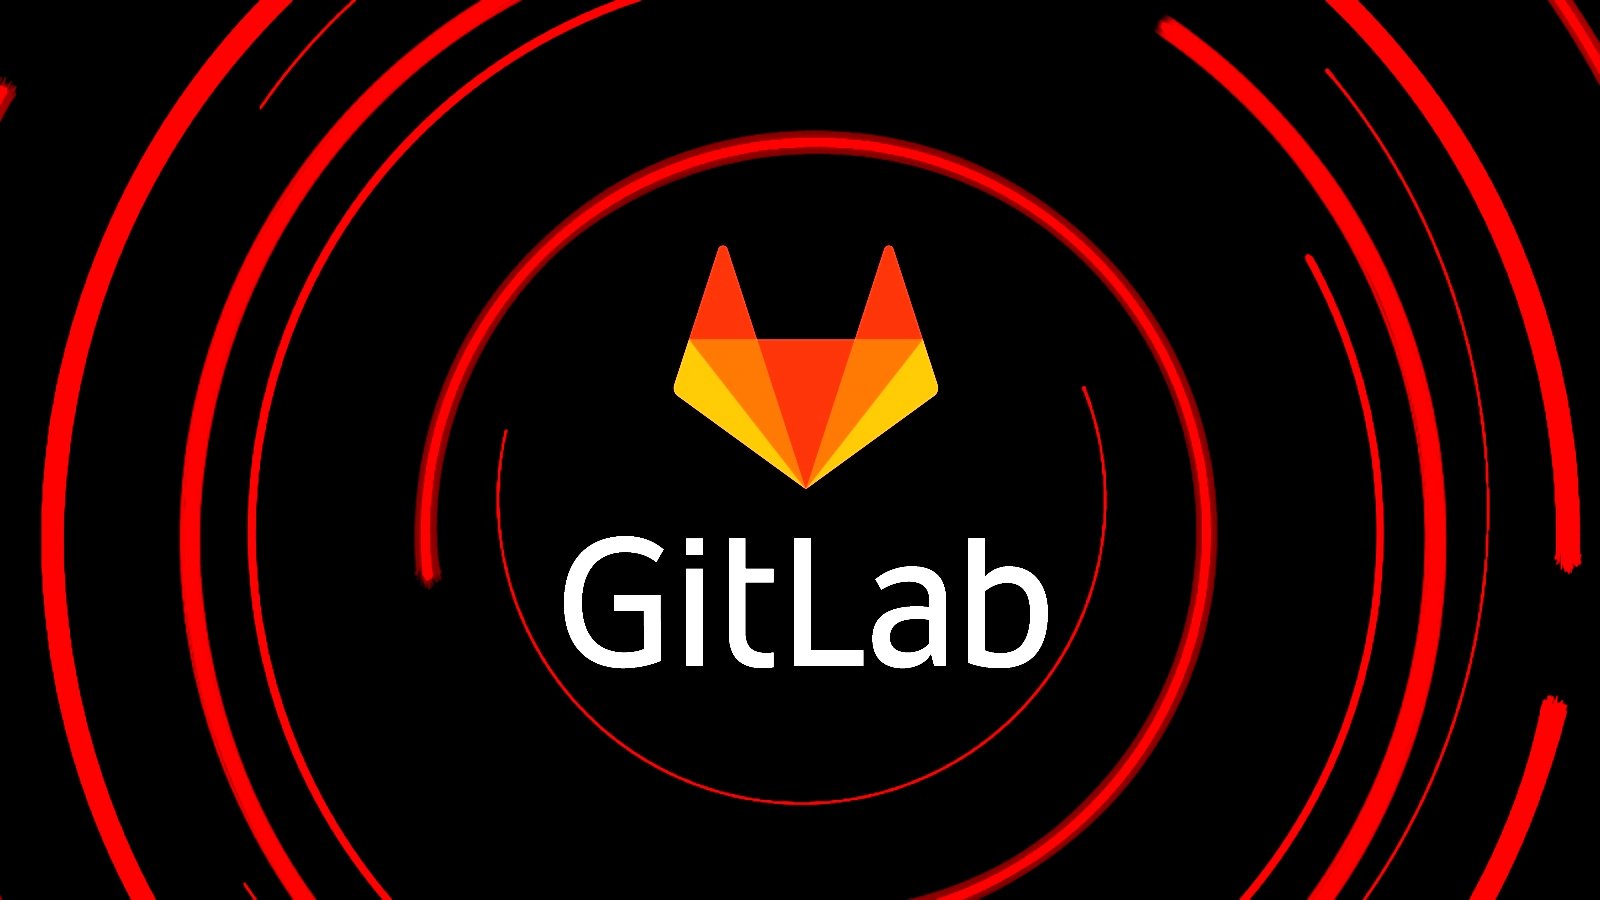 GitLab 'strongly recommends' patching max severity flaw ASAP